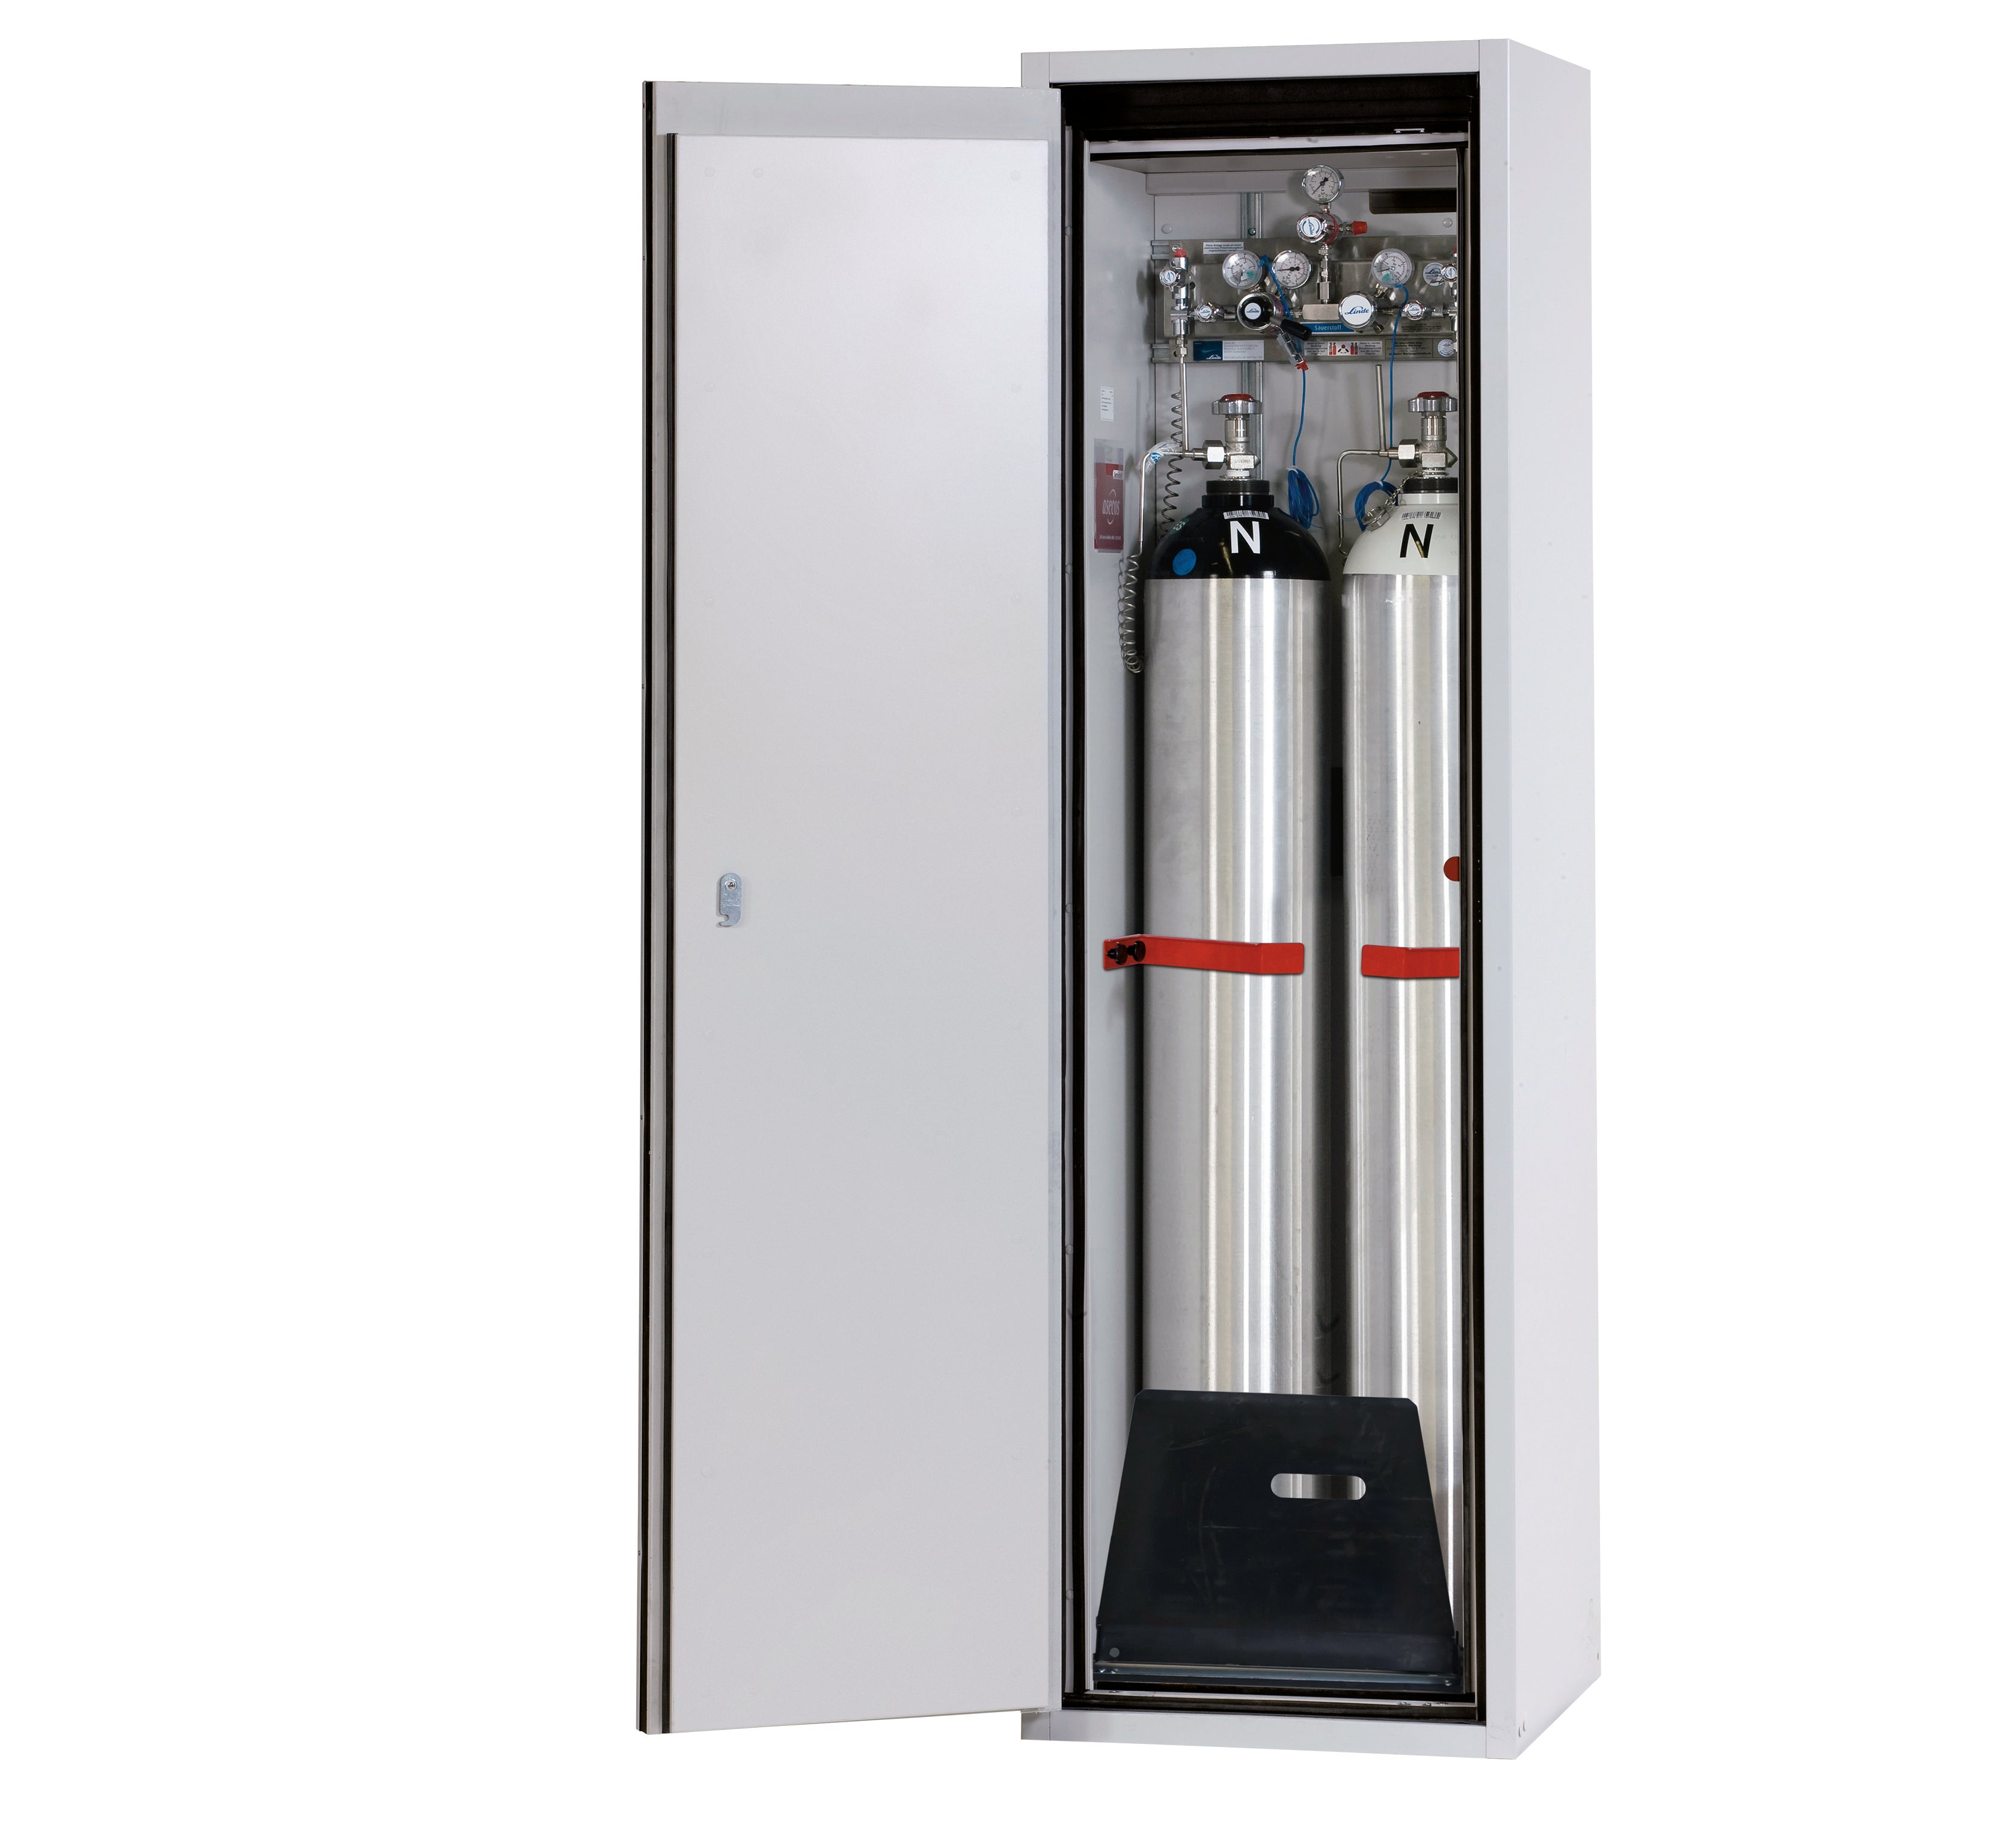 Type 90 compressed gas bottle cabinet G-ULTIMATE-90 model G90.205.060.2F in light gray RAL 7035 with standard interior fittings for 2x compressed gas bottles of 50 liters each